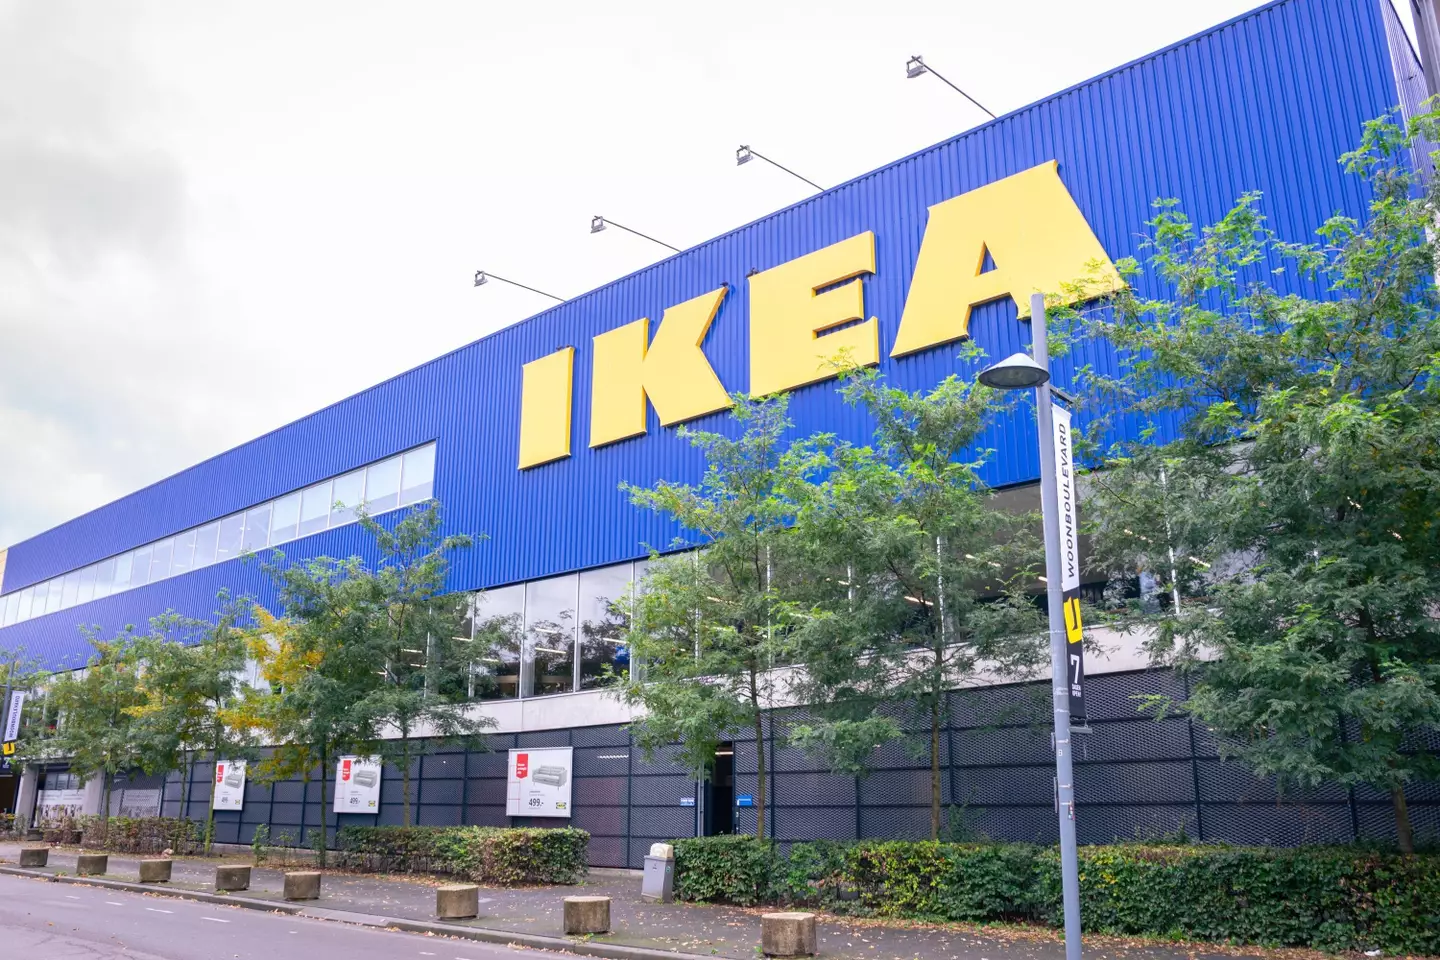 The IKEA brand is recognisable all around the world.